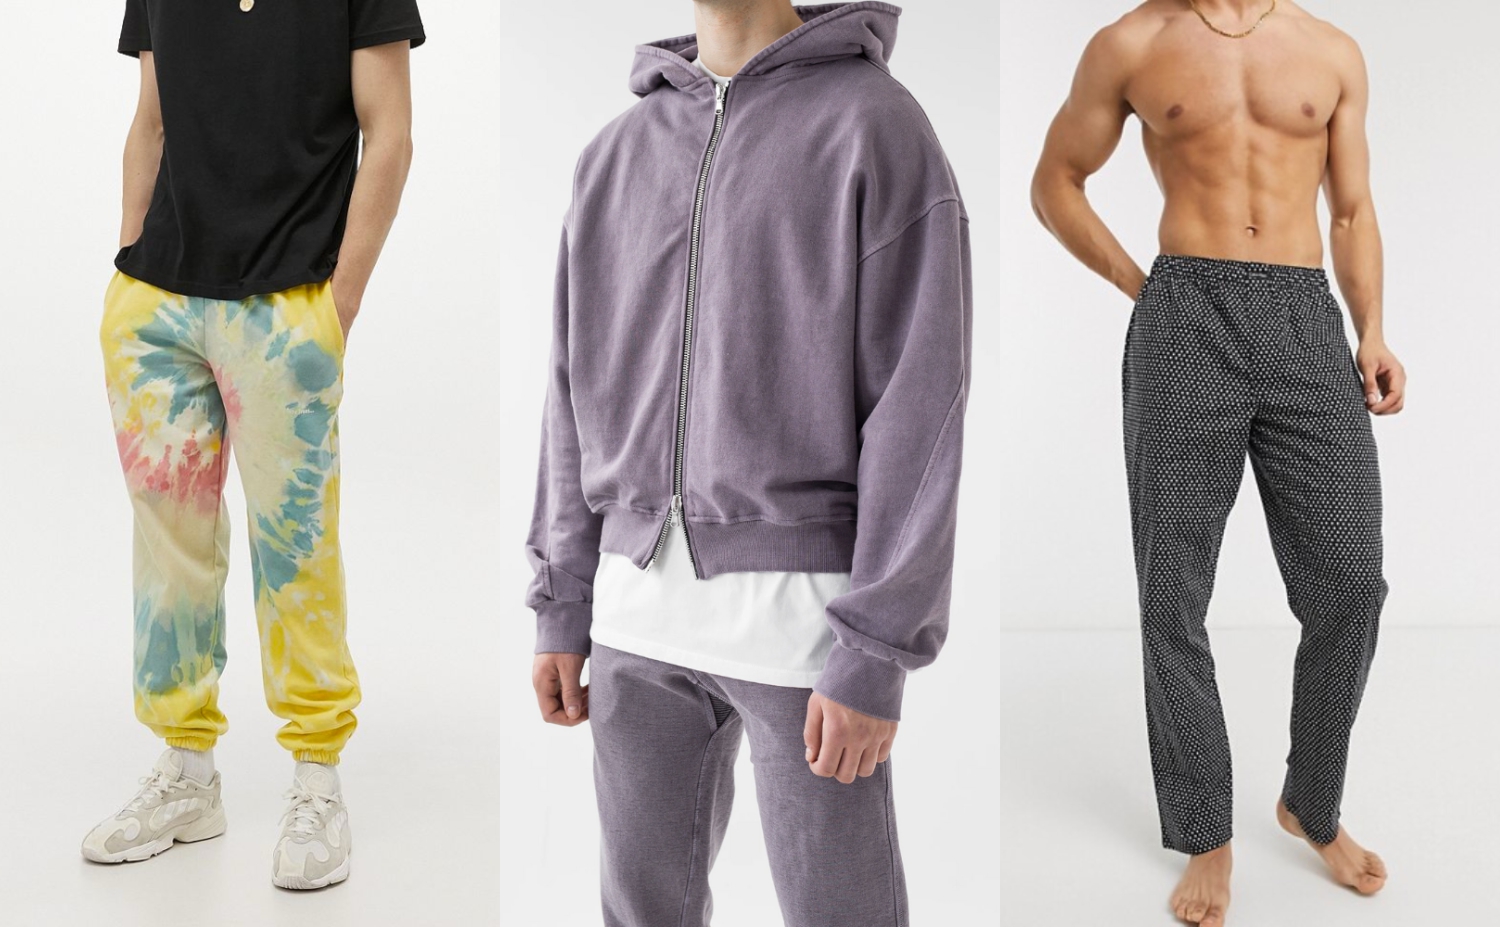 PAUSE Editor Picks: Rhys Marcus Jay Spotlights His Cosy Must-Haves